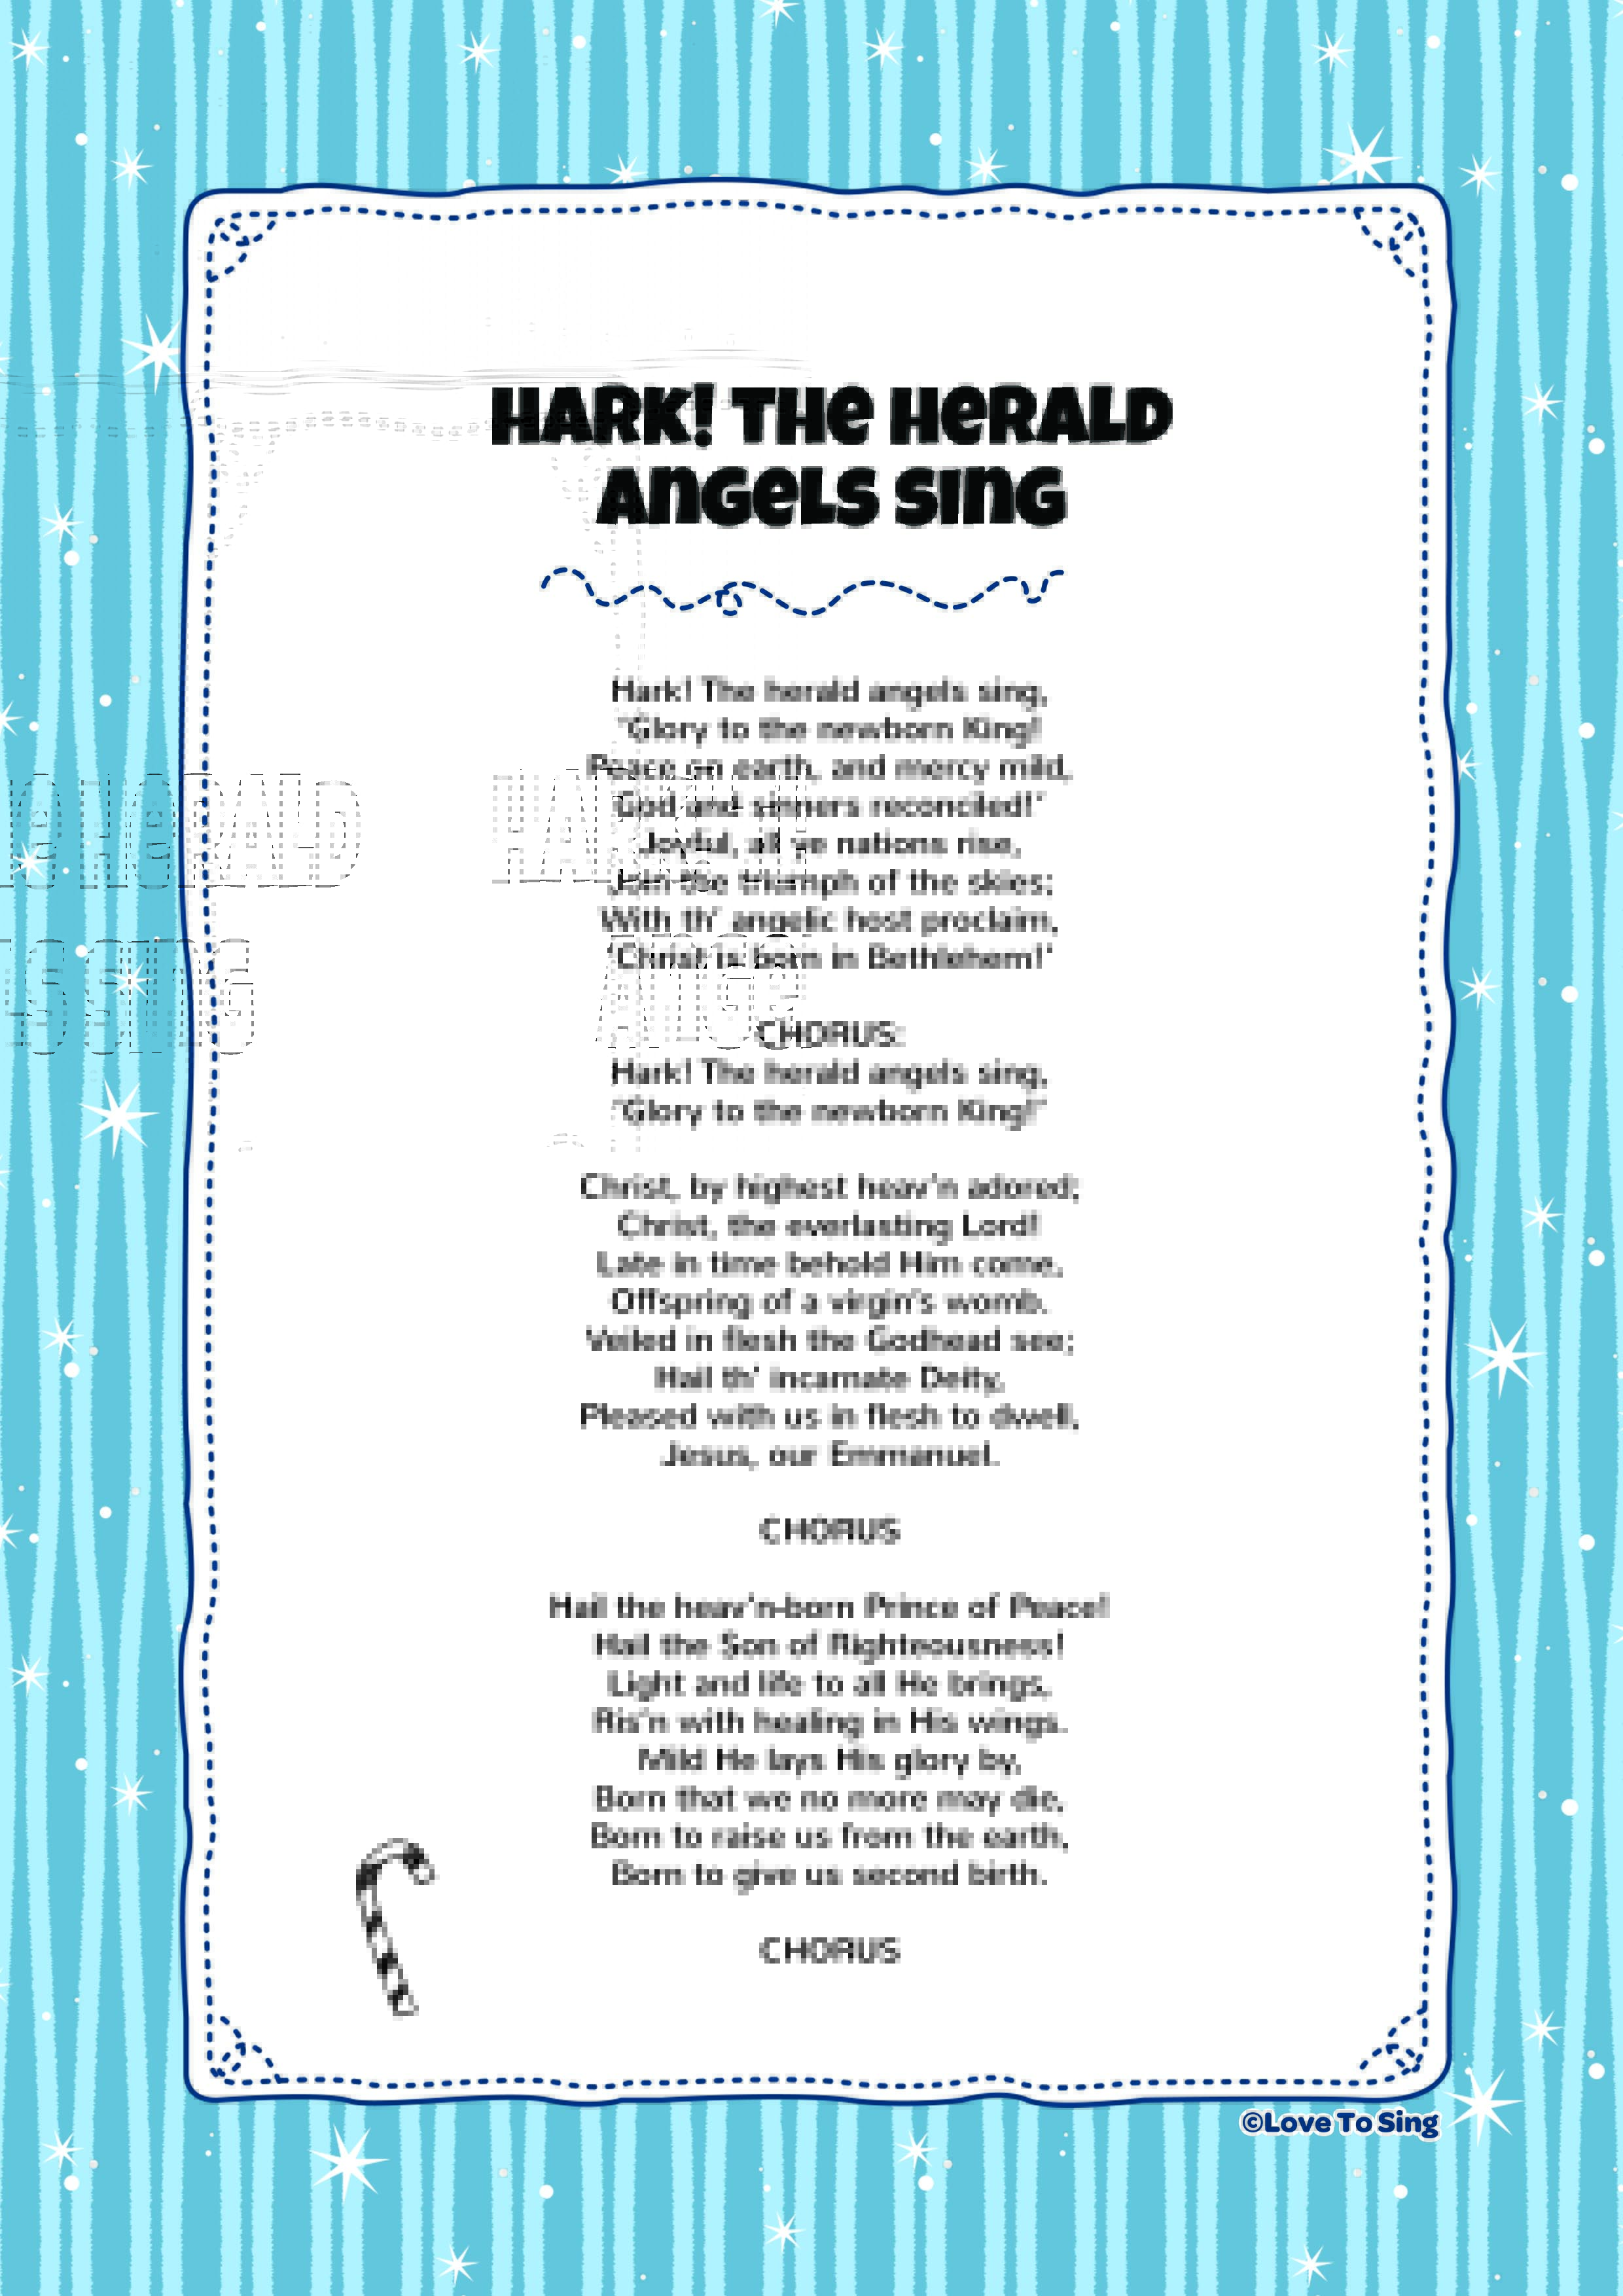 Hark! The Herald Angels Sing Kids Video Song with FREE Lyrics